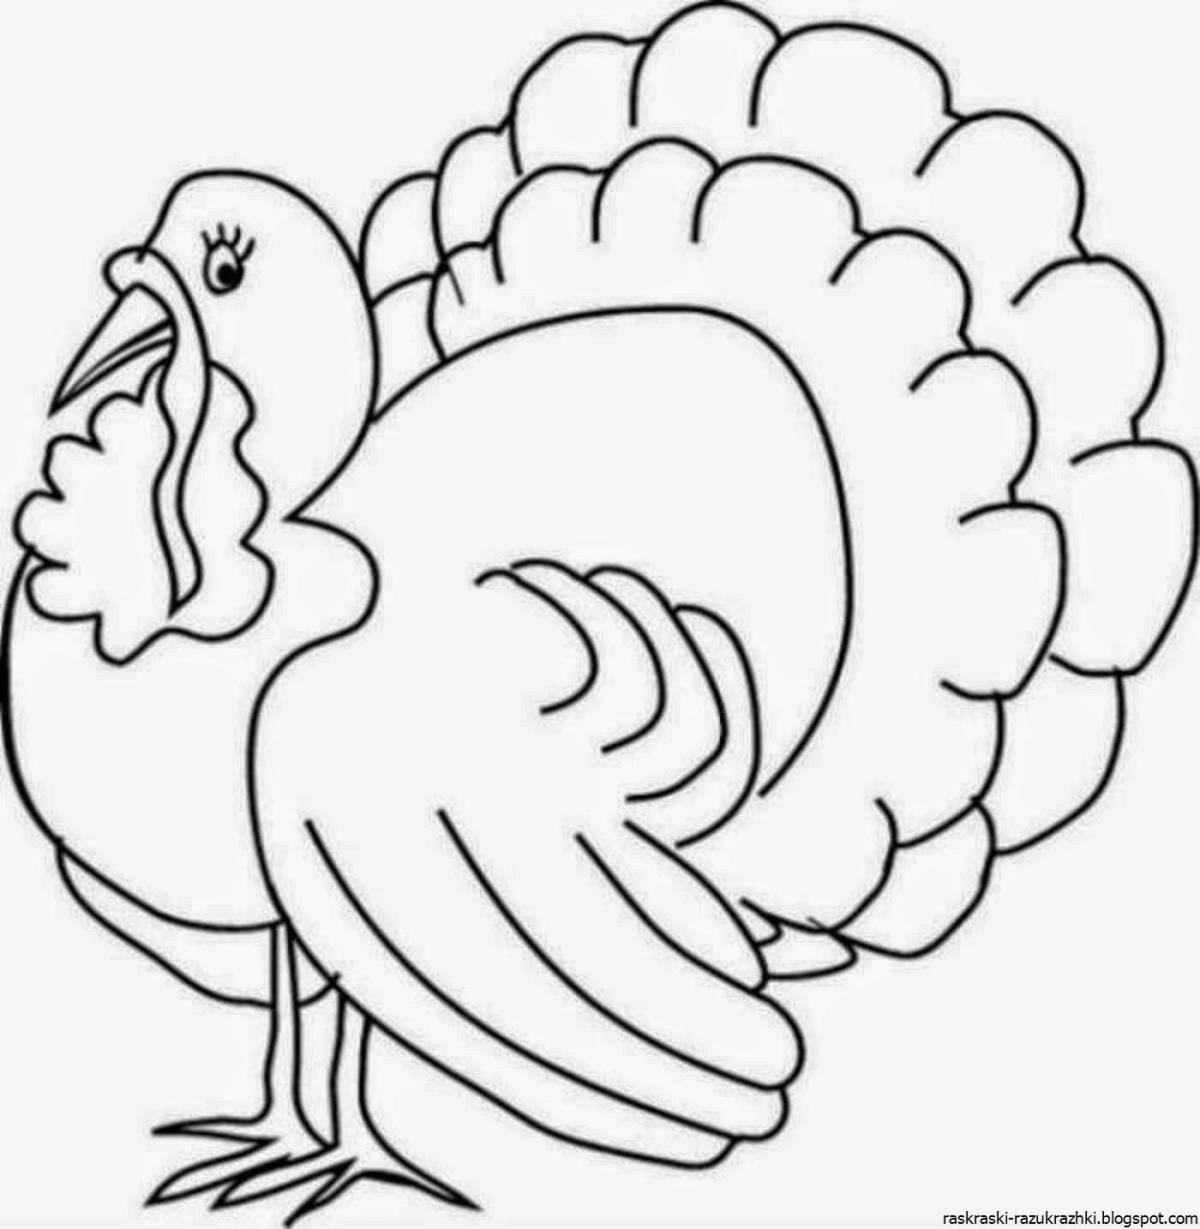 Bright turkey coloring book for kids